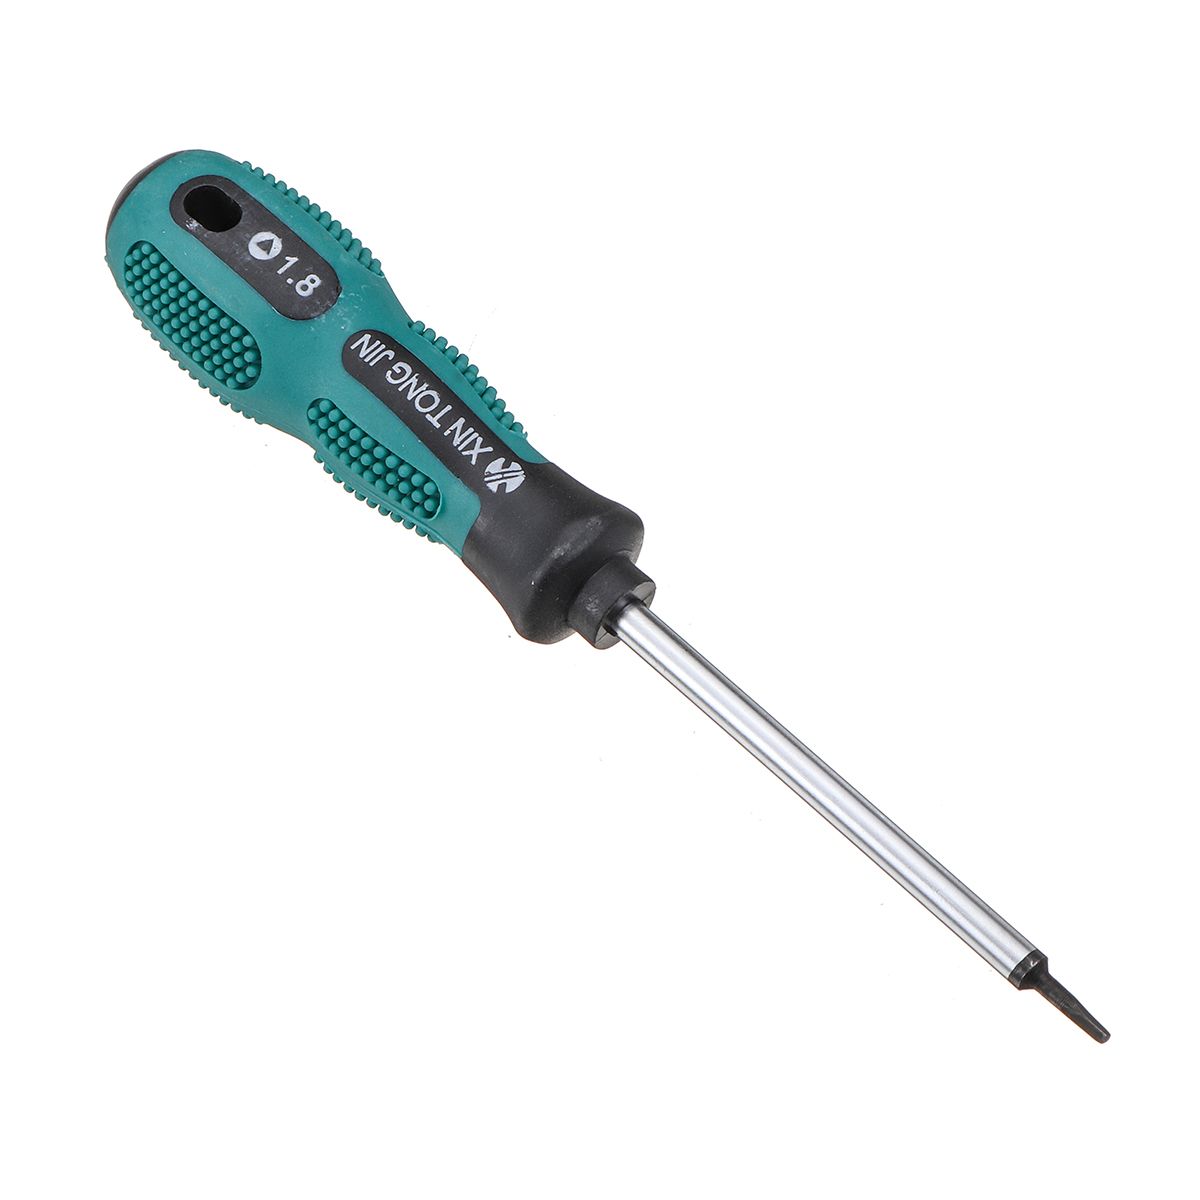 Portable-Insulated-Screwdriver-Magnetic-Bits-Watches-Toys-Repair-Tool-1553444